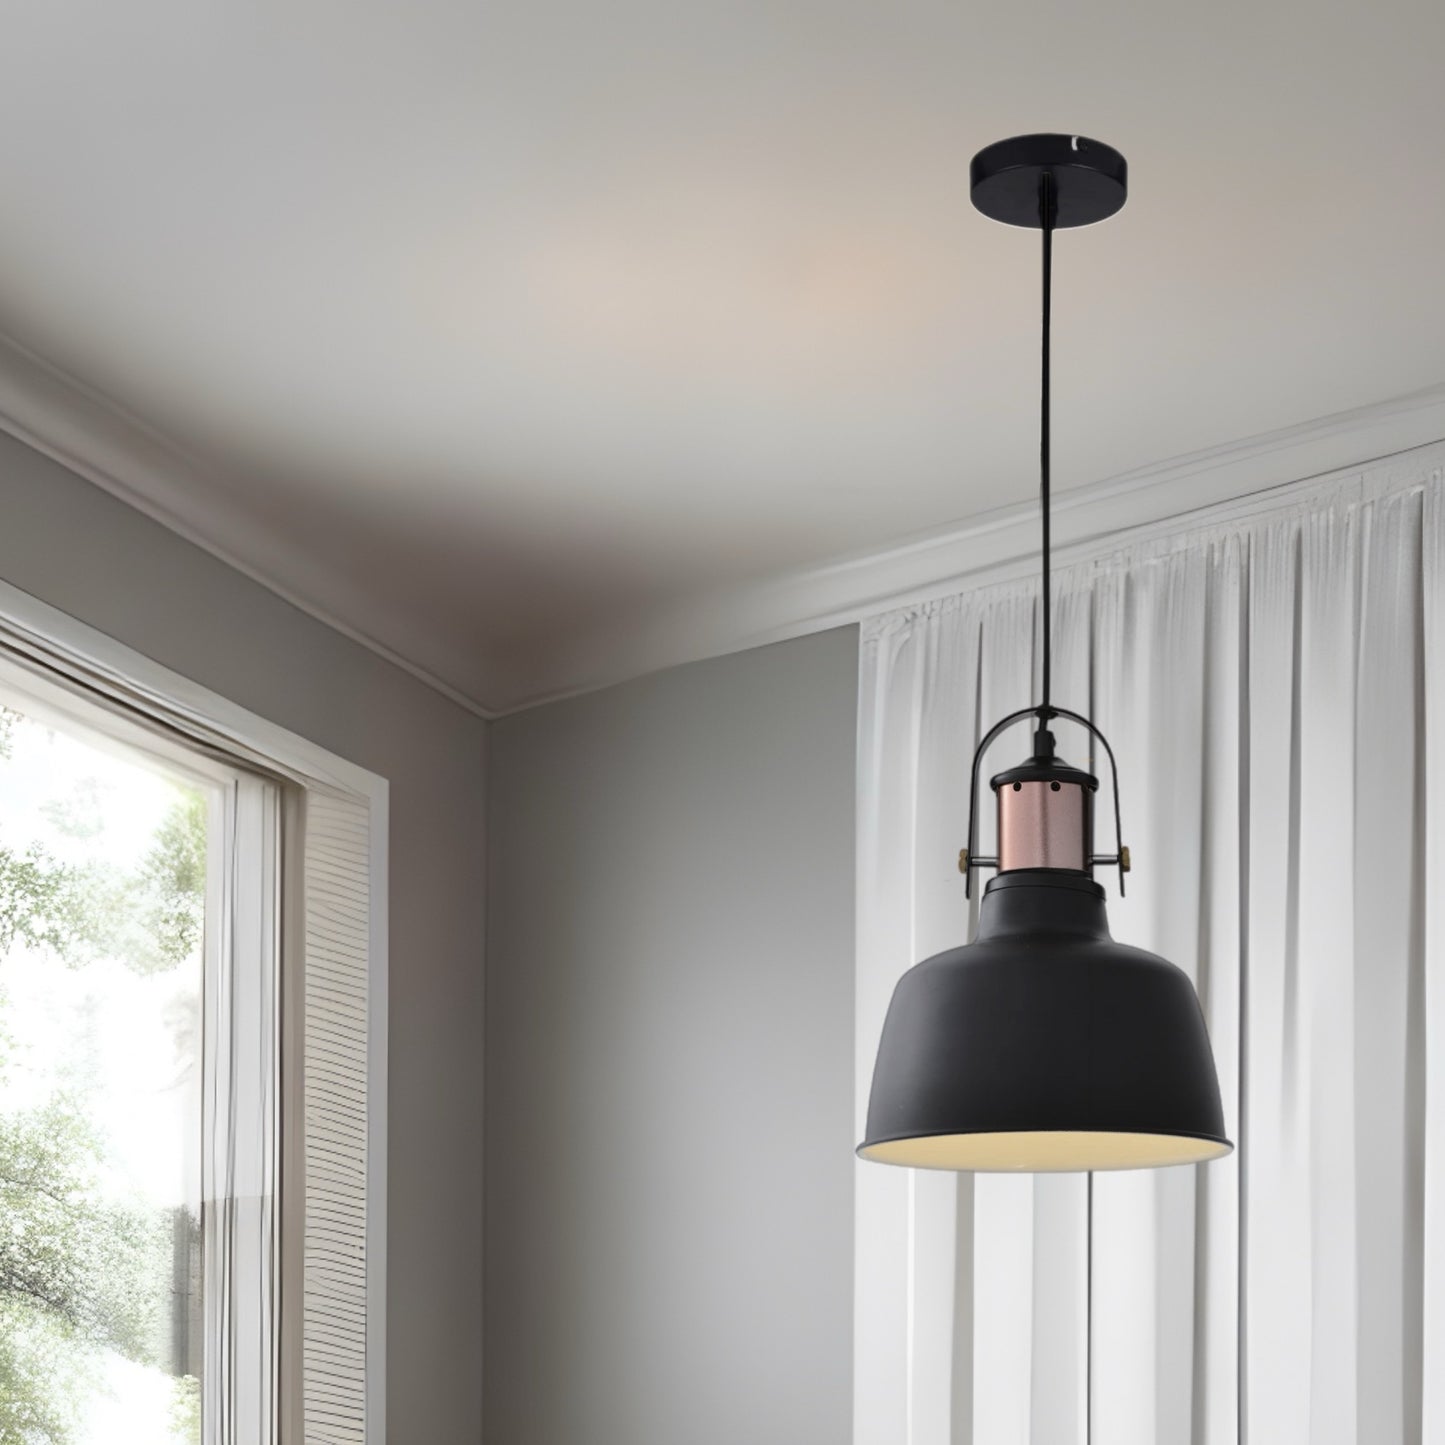 Our Marnie black adjustable dome ceiling pendant light is the perfect addition to any room to add a modern and industrial focal point. The industrial style of this light brings a dark and elegant aesthetic to your interior as the dome shape creates a modern and contemporary appearance. Would look great above a kitchen island or dining table. The height can be adjusted at the time of fitting.